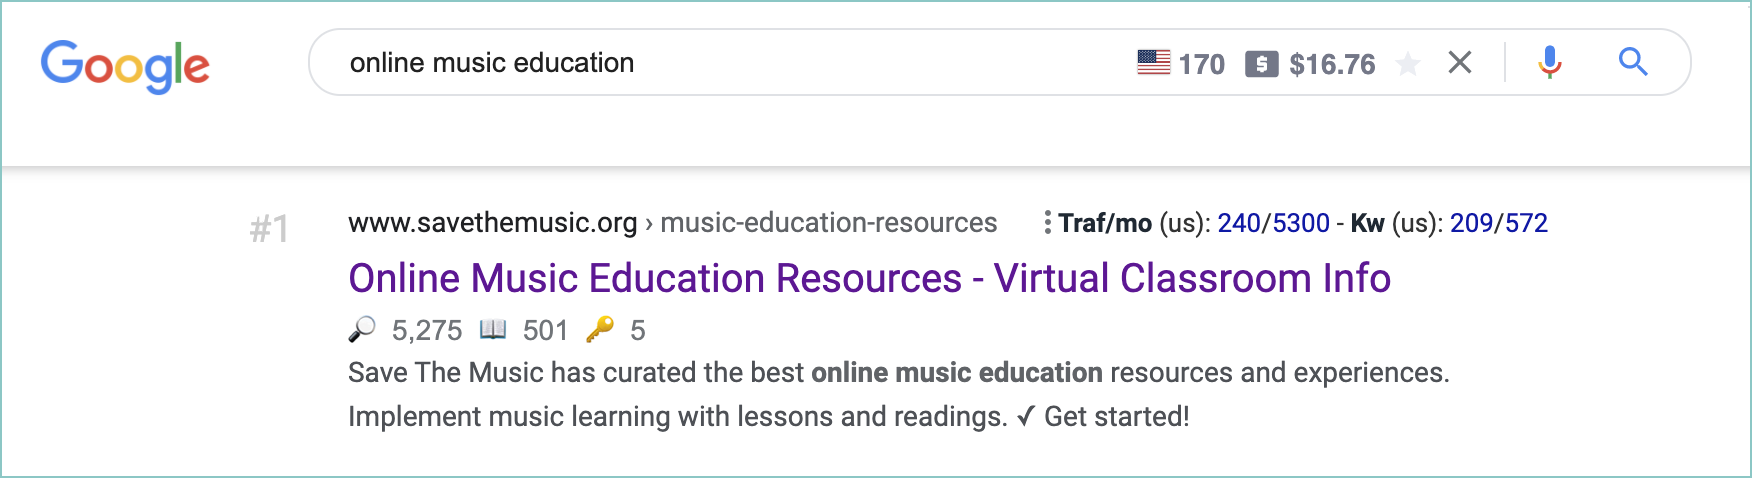 screenshot for online music education search results